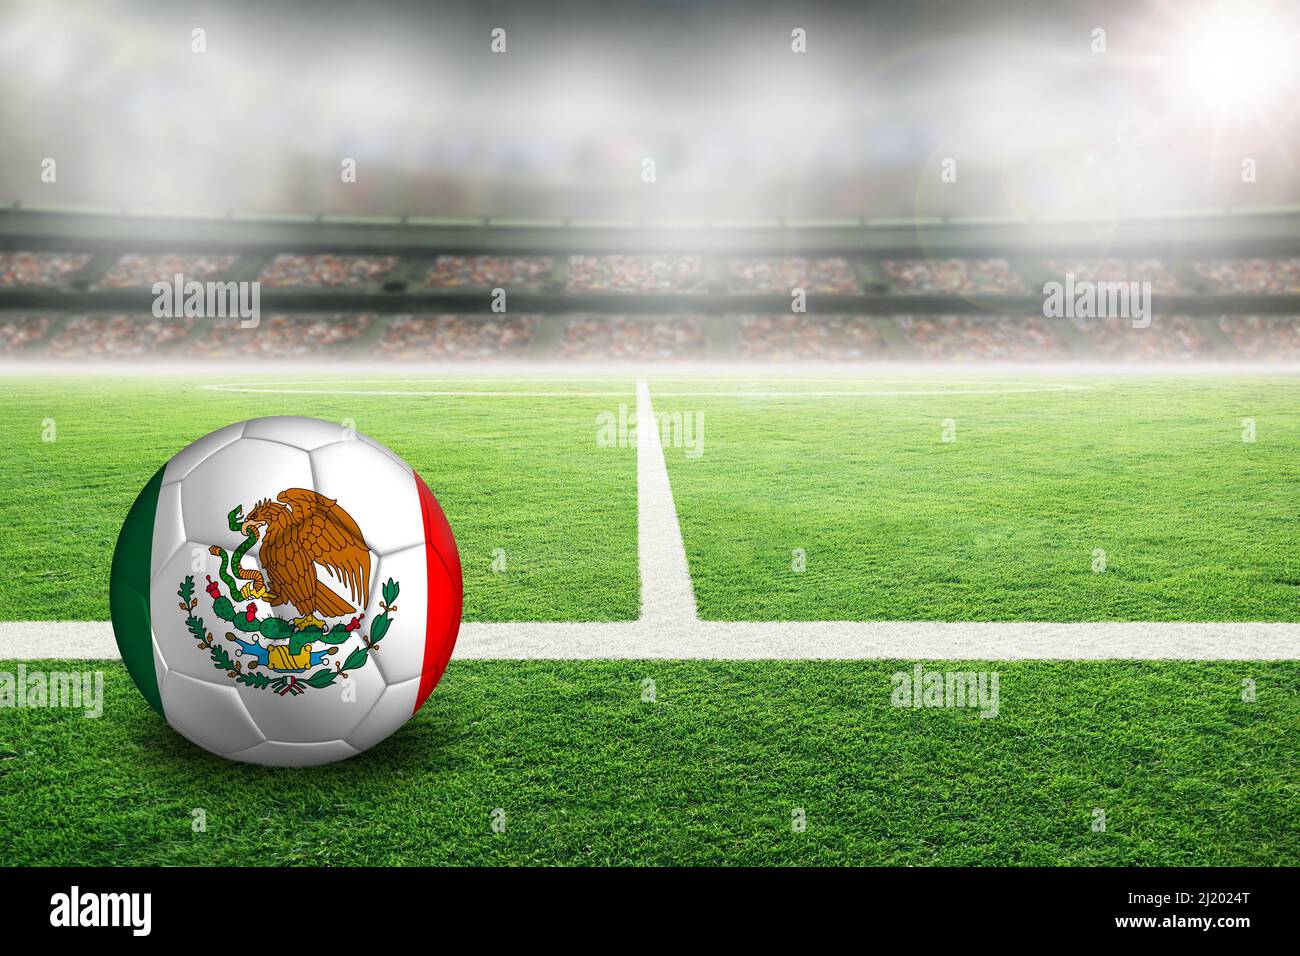 Football in brightly lit outdoor stadium with painted flag of Mexico. Focus on foreground and soccer ball with shallow depth of field on background an Stock Photo